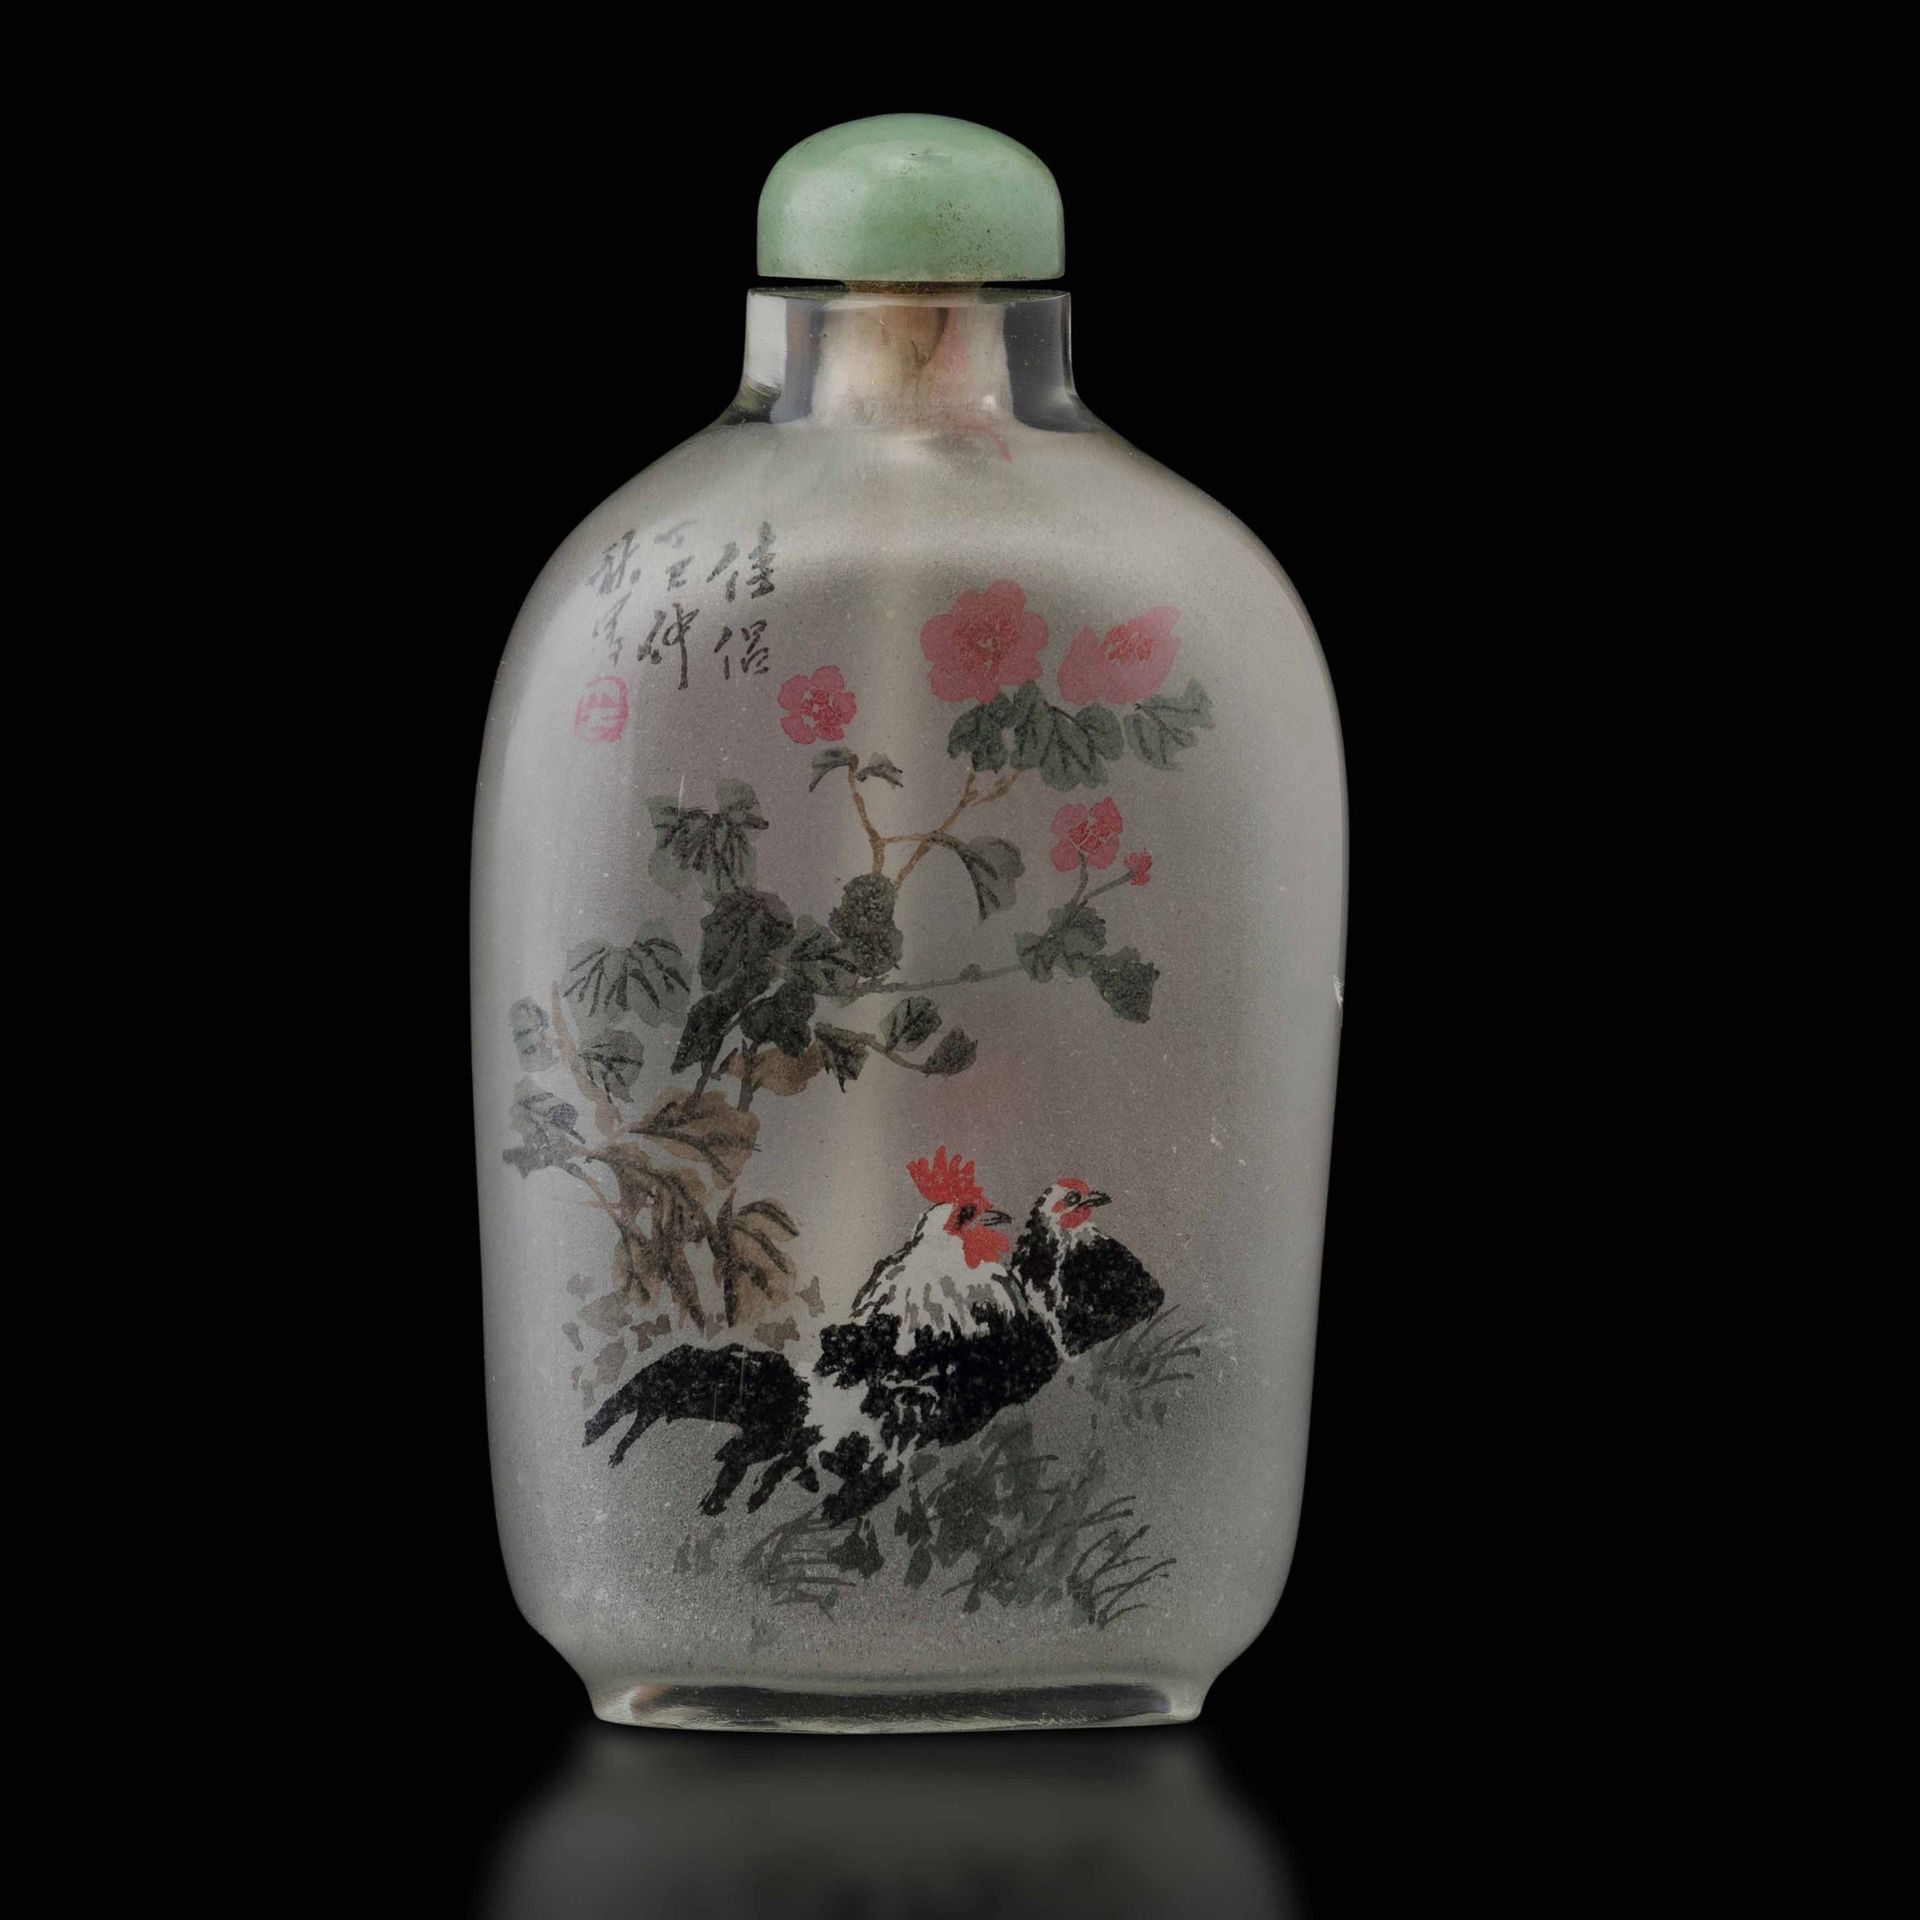 A glass snuff bottle, China, early 1900s 高8.5厘米